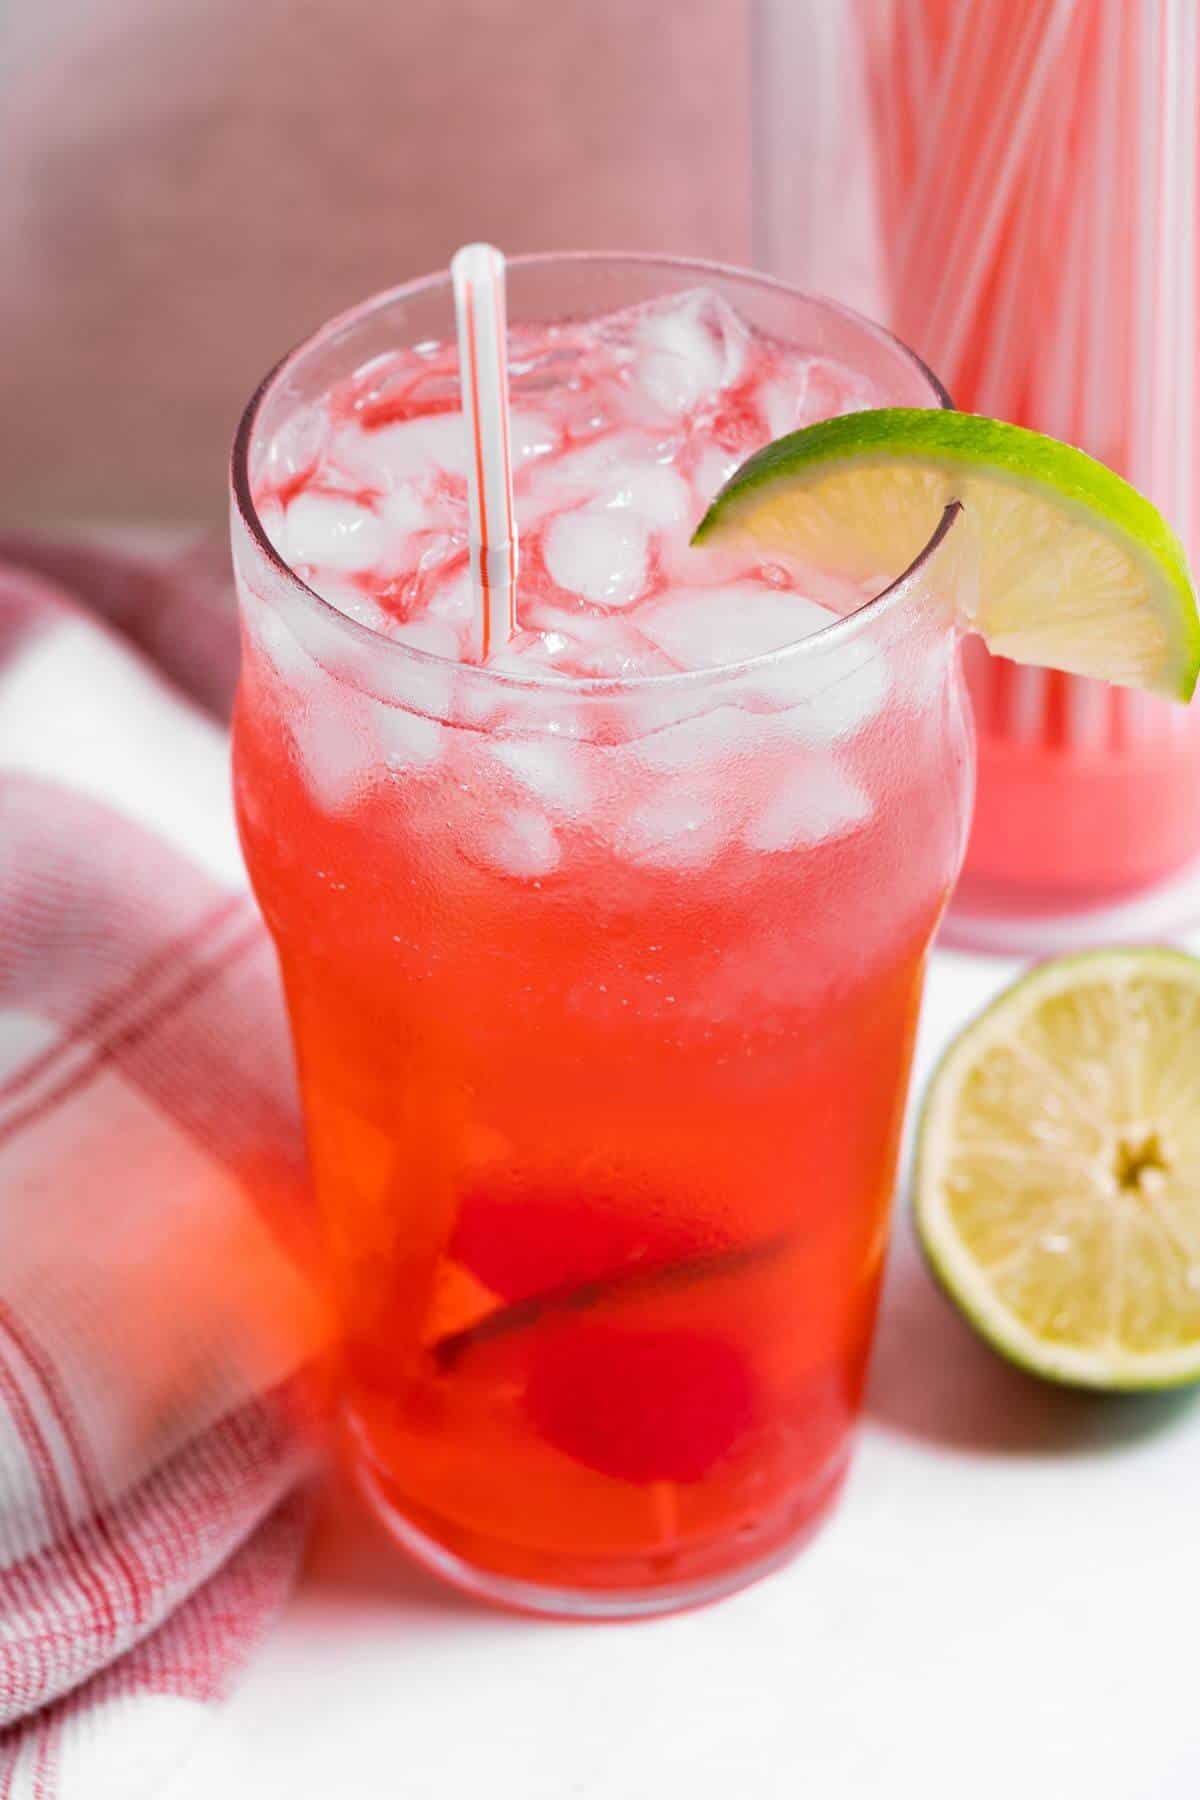 Top angled view of cherry limeade drink.